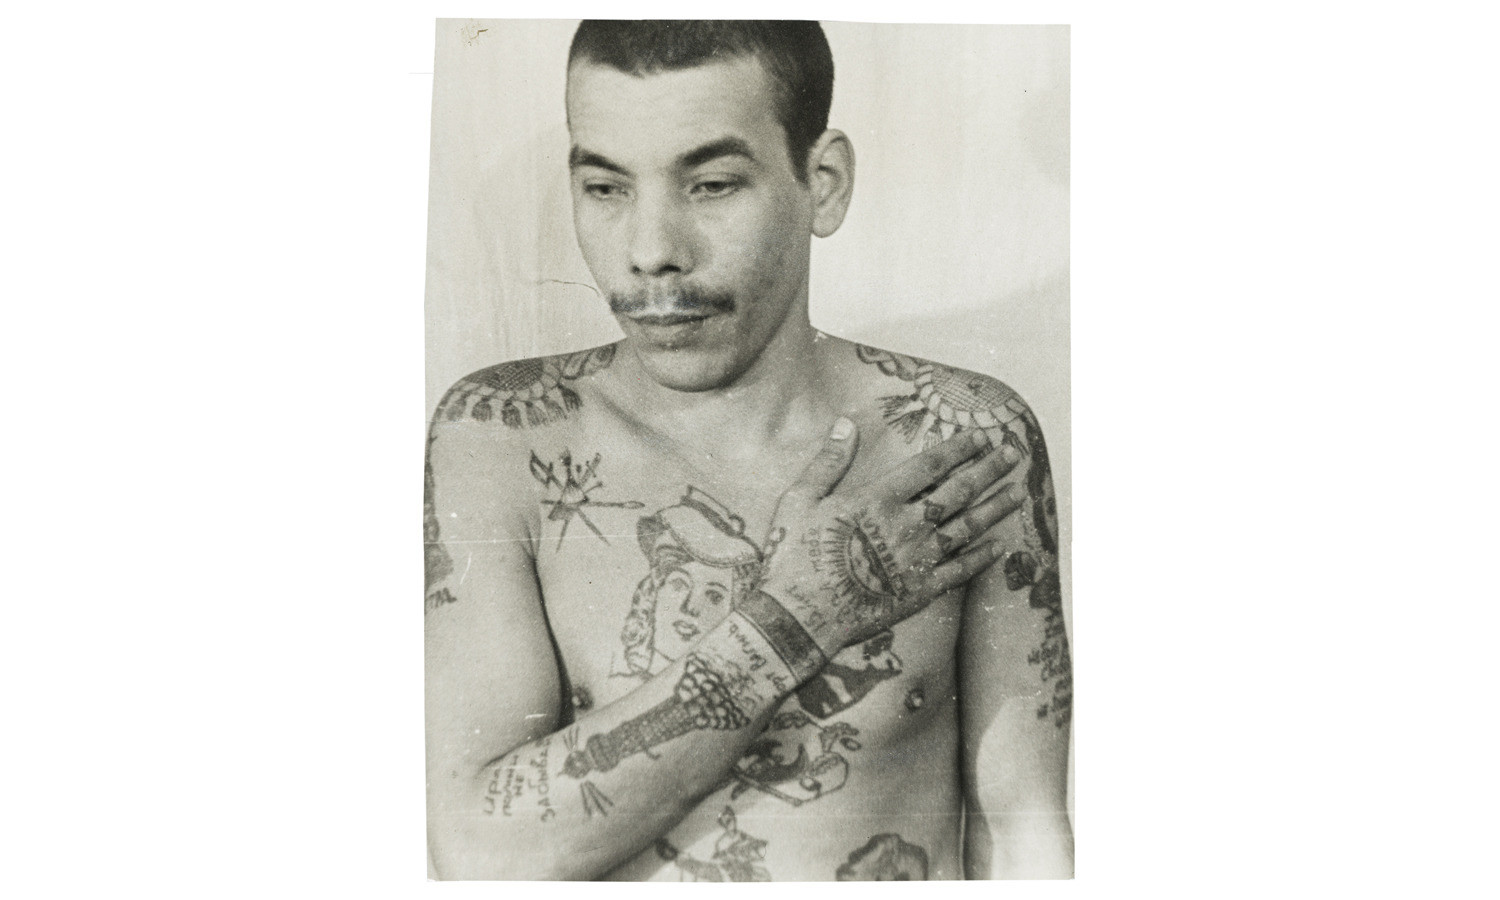 The Secret Meanings Behind Russian Prison Tattoos